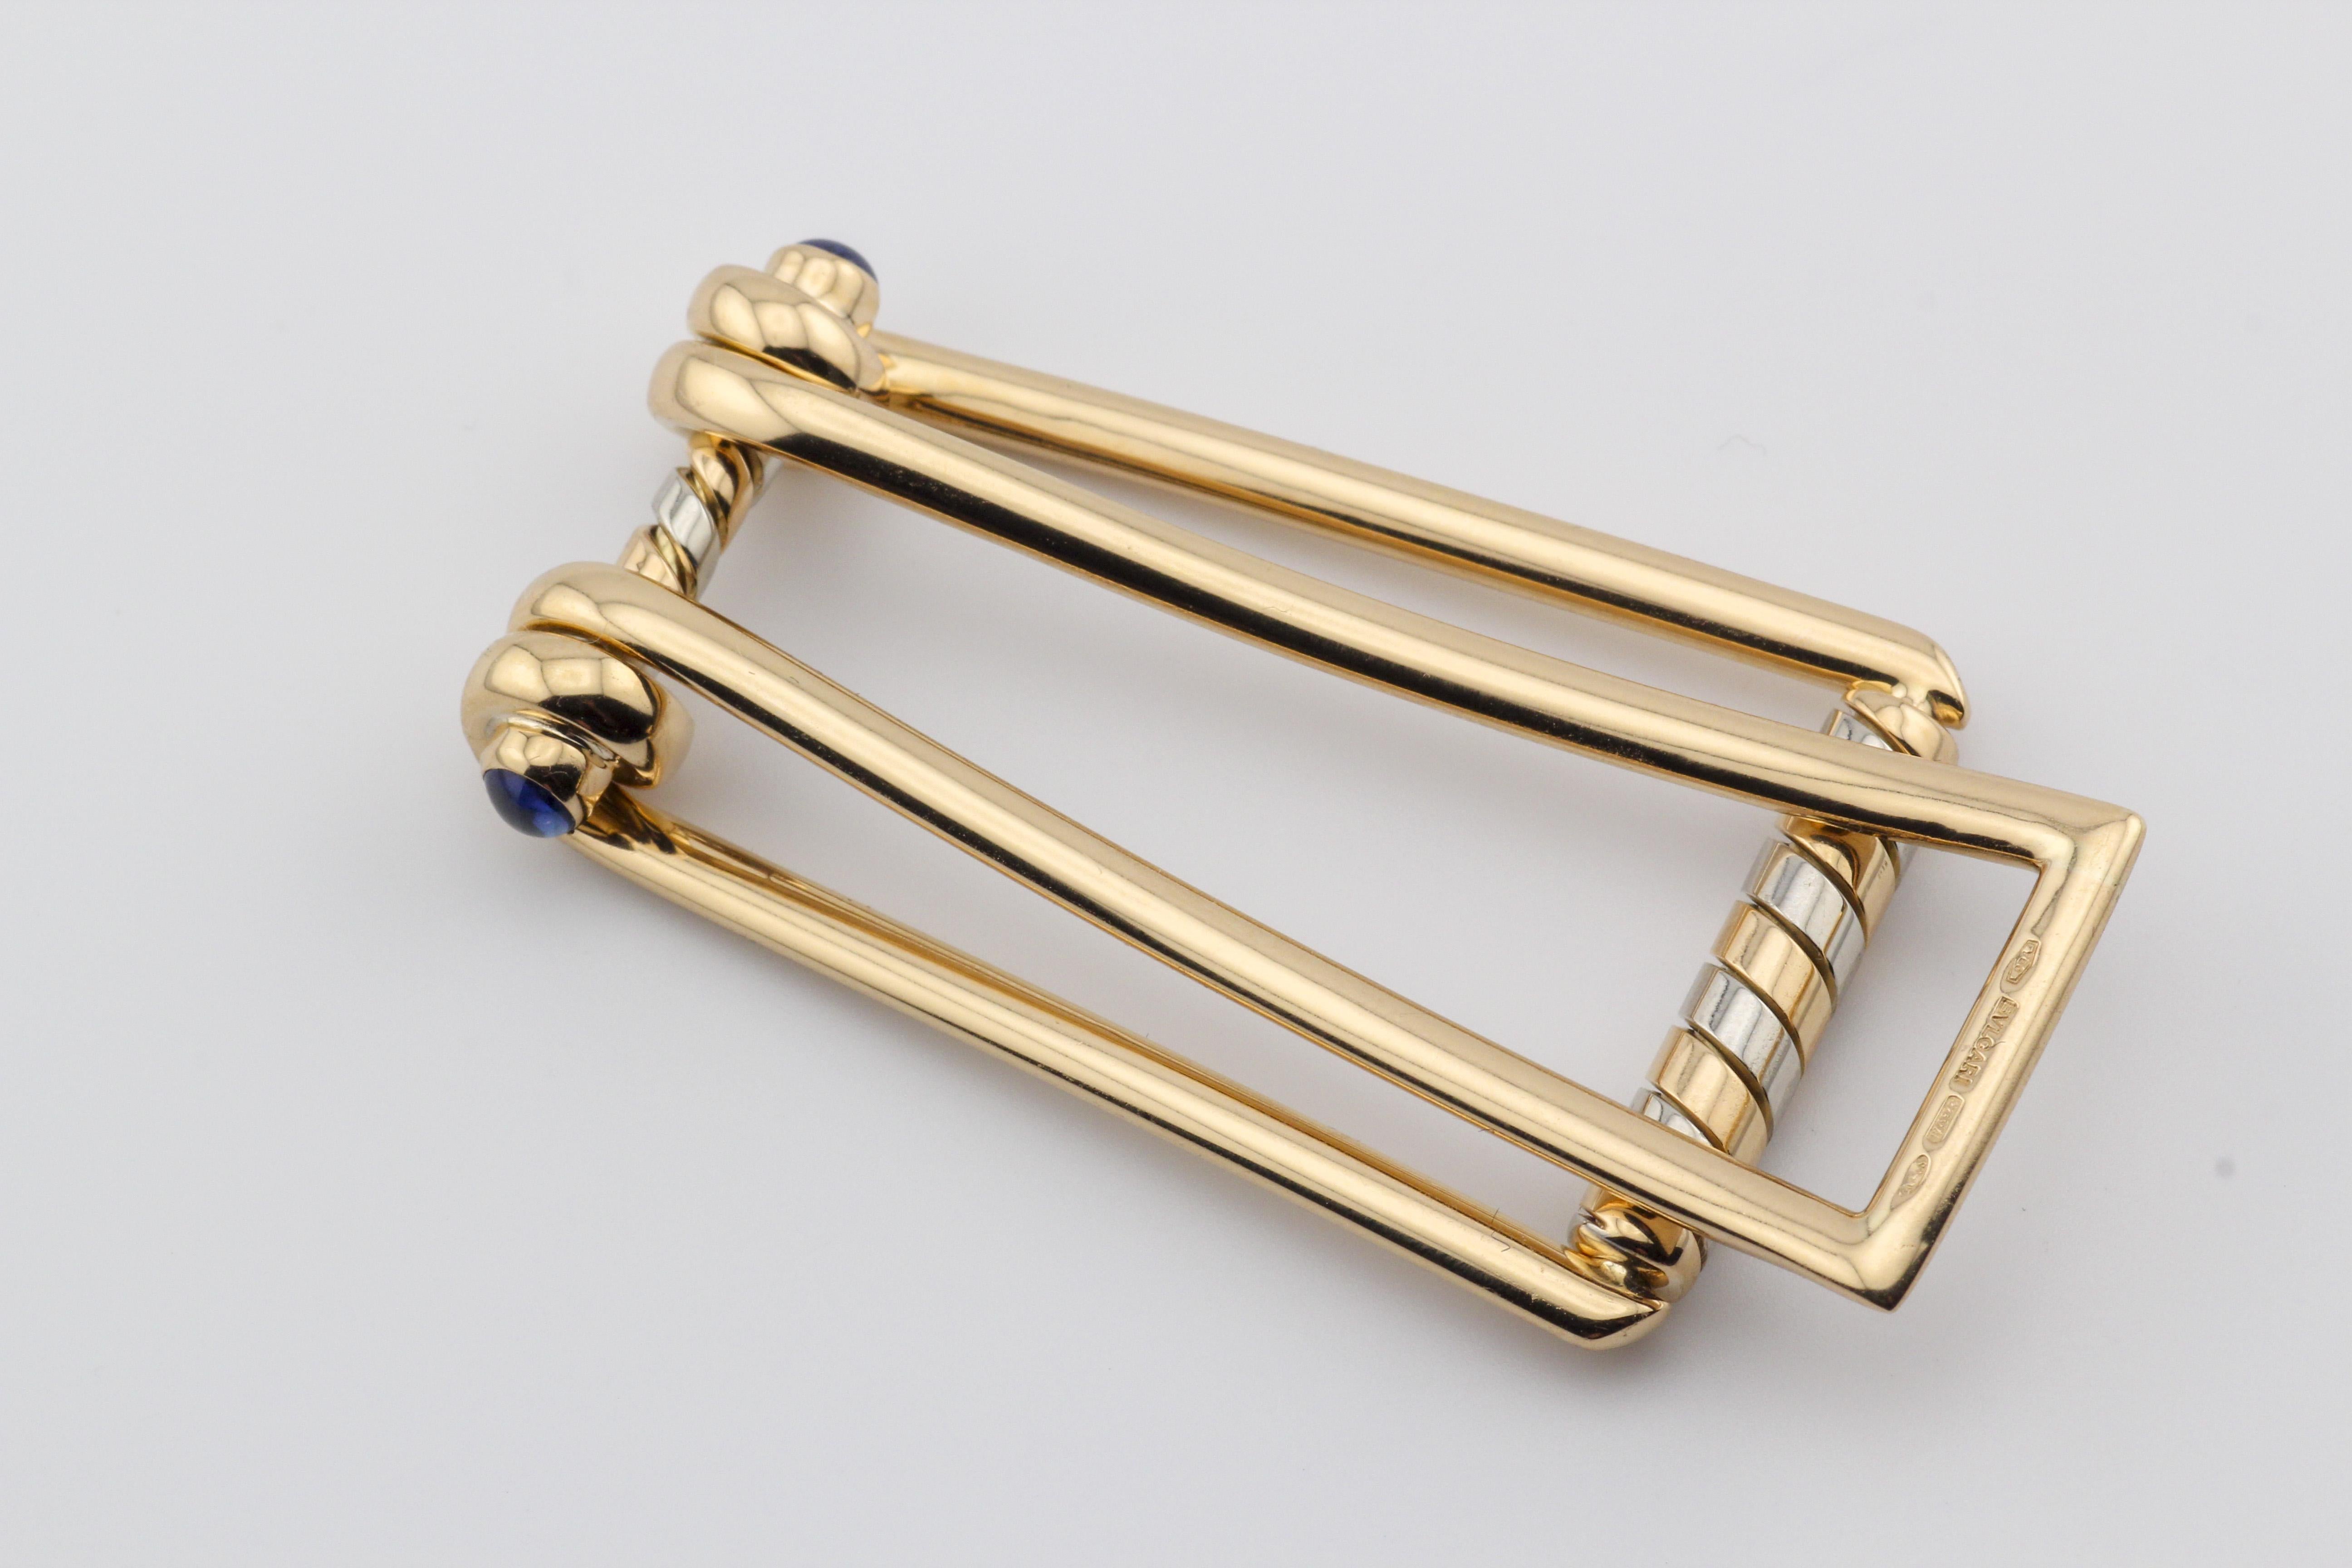 Introducing the Bulgari Tubogas Sapphire Two-Tone 18K Gold Money Clip, a luxurious and distinctive accessory that seamlessly blends Italian artistry with functionality. Crafted by Bulgari, a symbol of timeless elegance and craftsmanship, this money